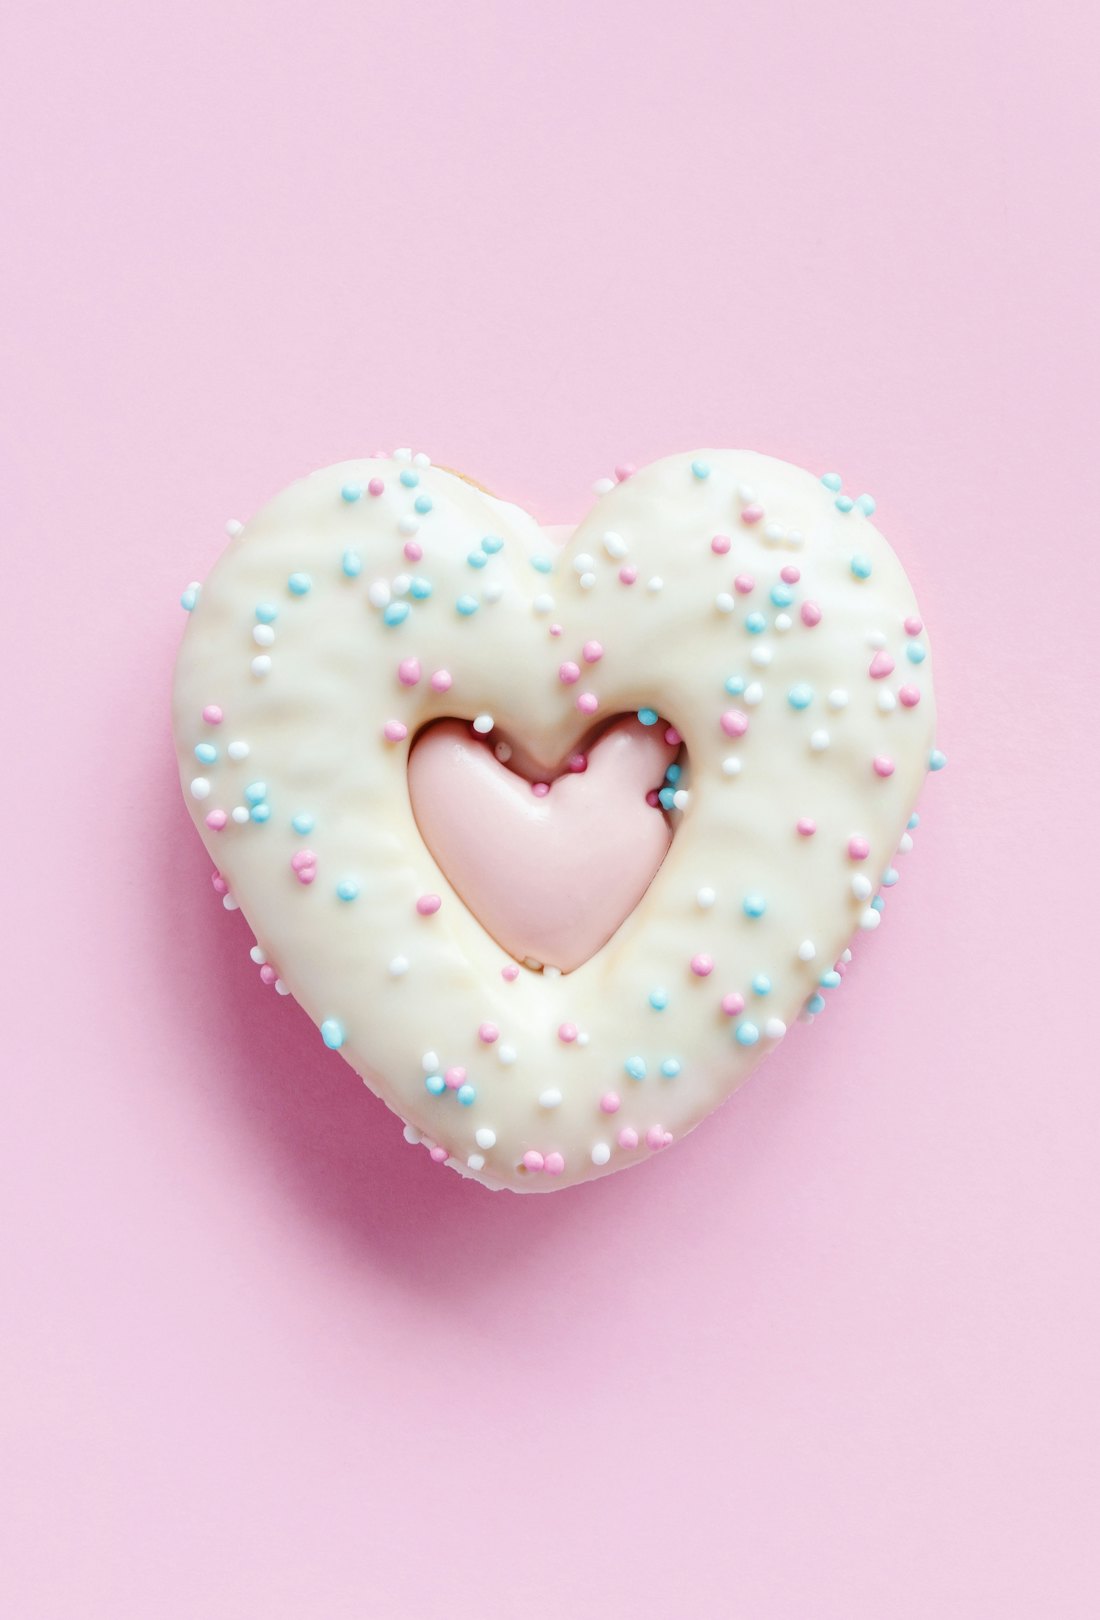 Flat lay of heart shaped gingerbread cookie with sprinkles and icing on pink background. Top view of...